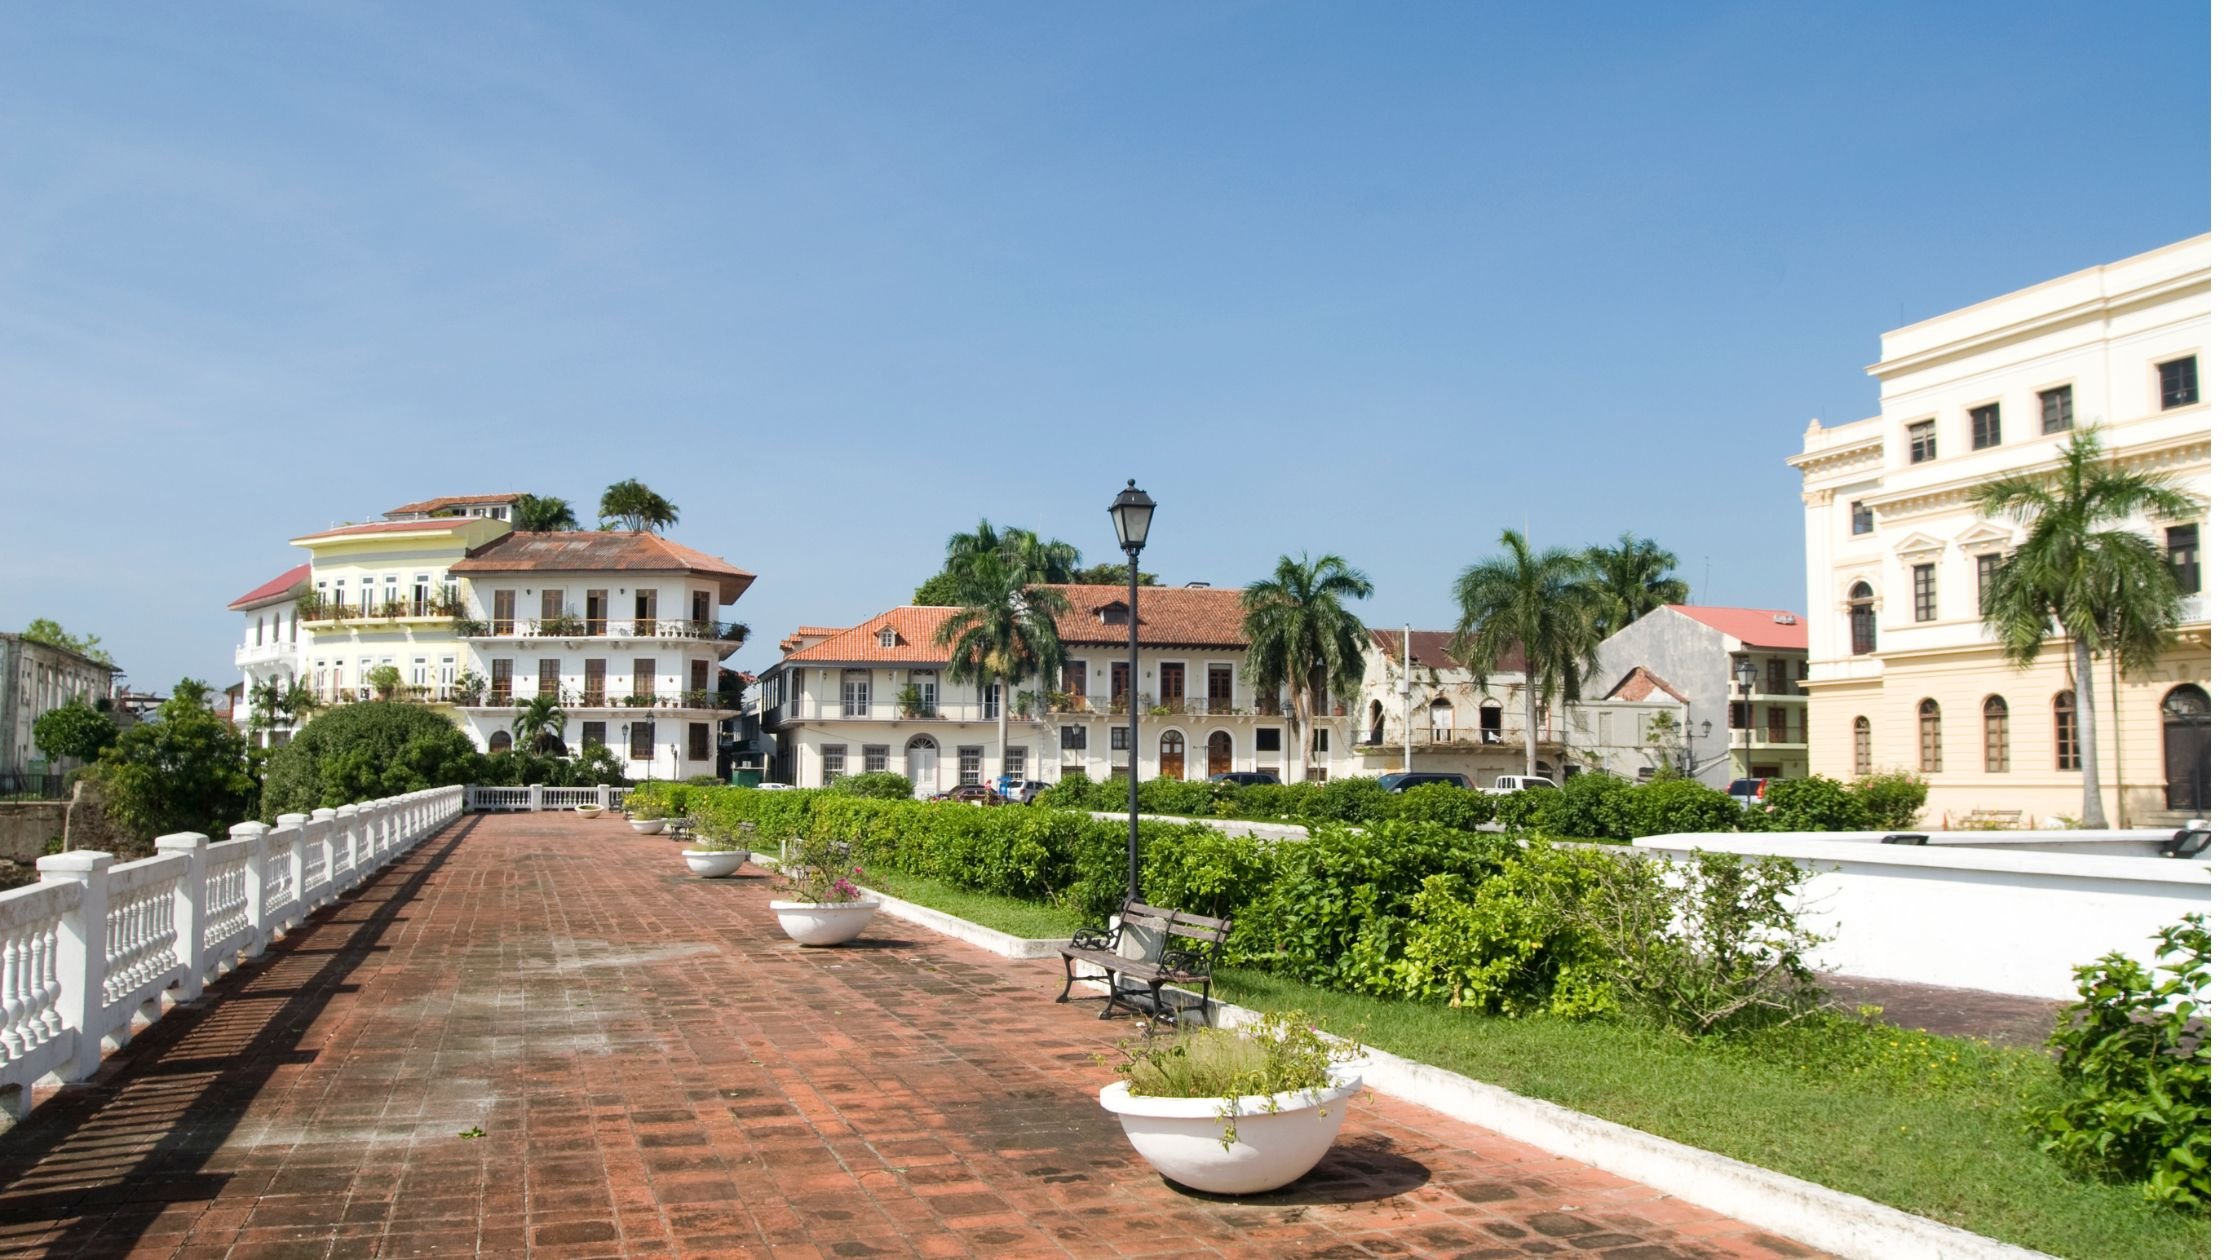 Casco Viejo, also known as Casco Antiguo or San Felipe, is the historic district of Panama City.